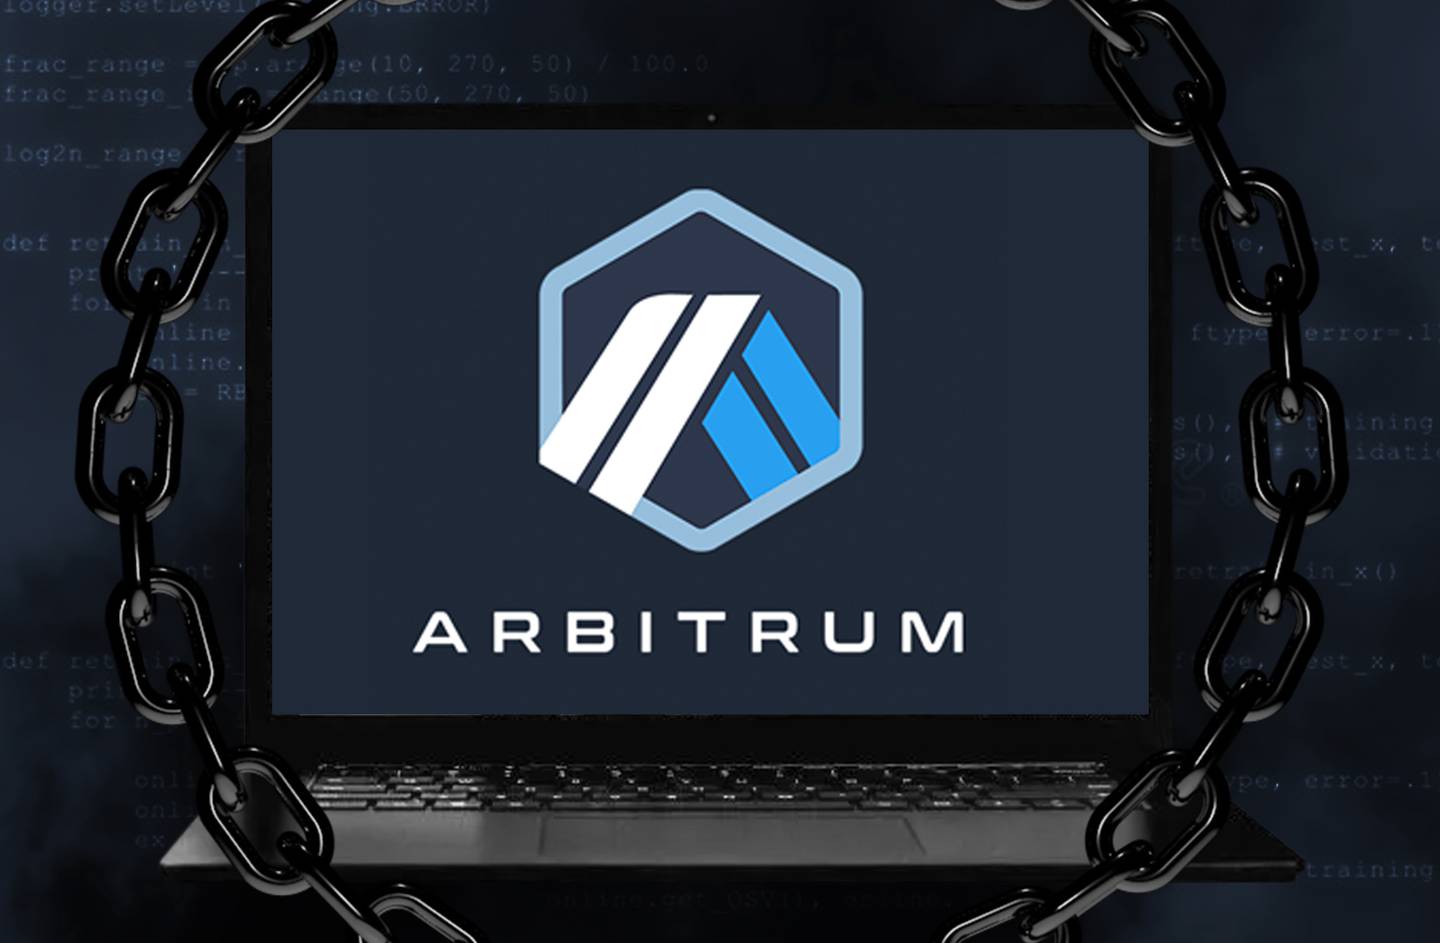 A hacker is getting ready to claim 2.8M Arbitrum tokens from compromised wallets.